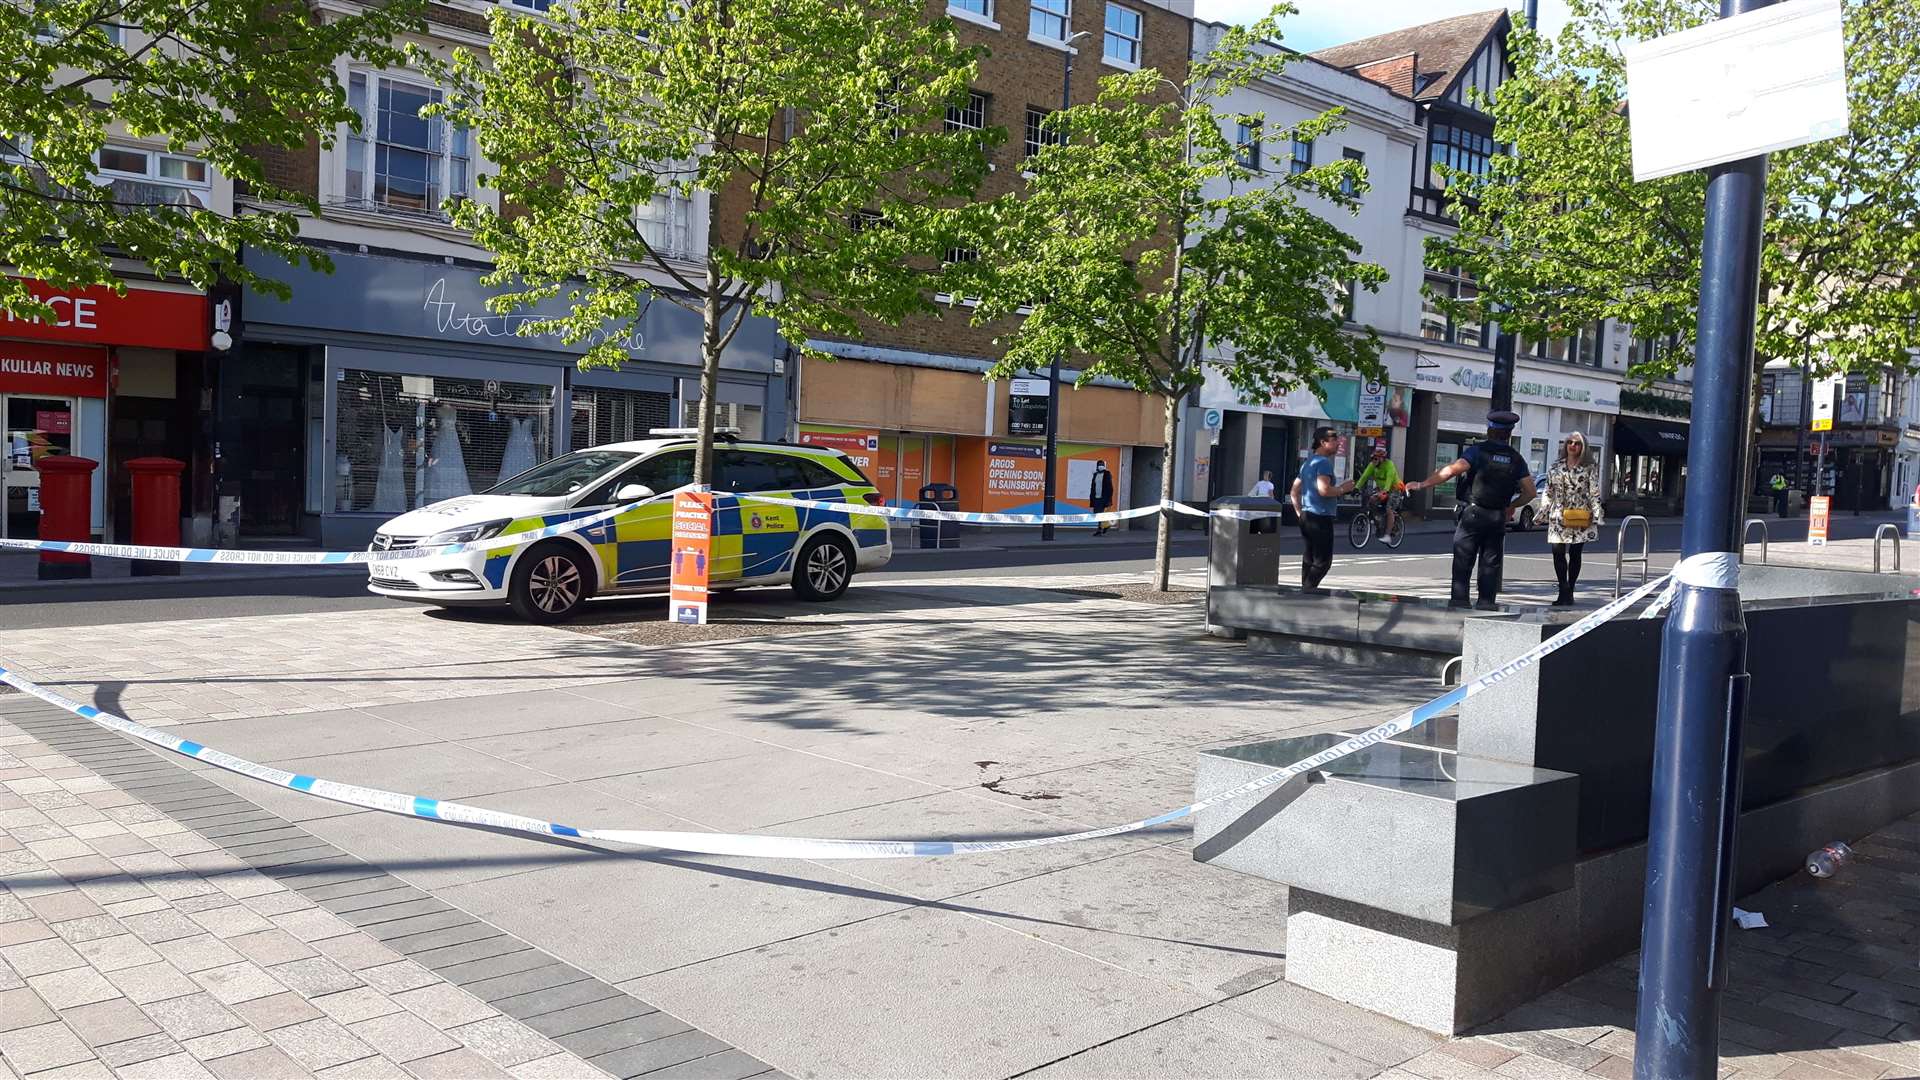 Police cordoned off part of Maidstone High Street yesterday